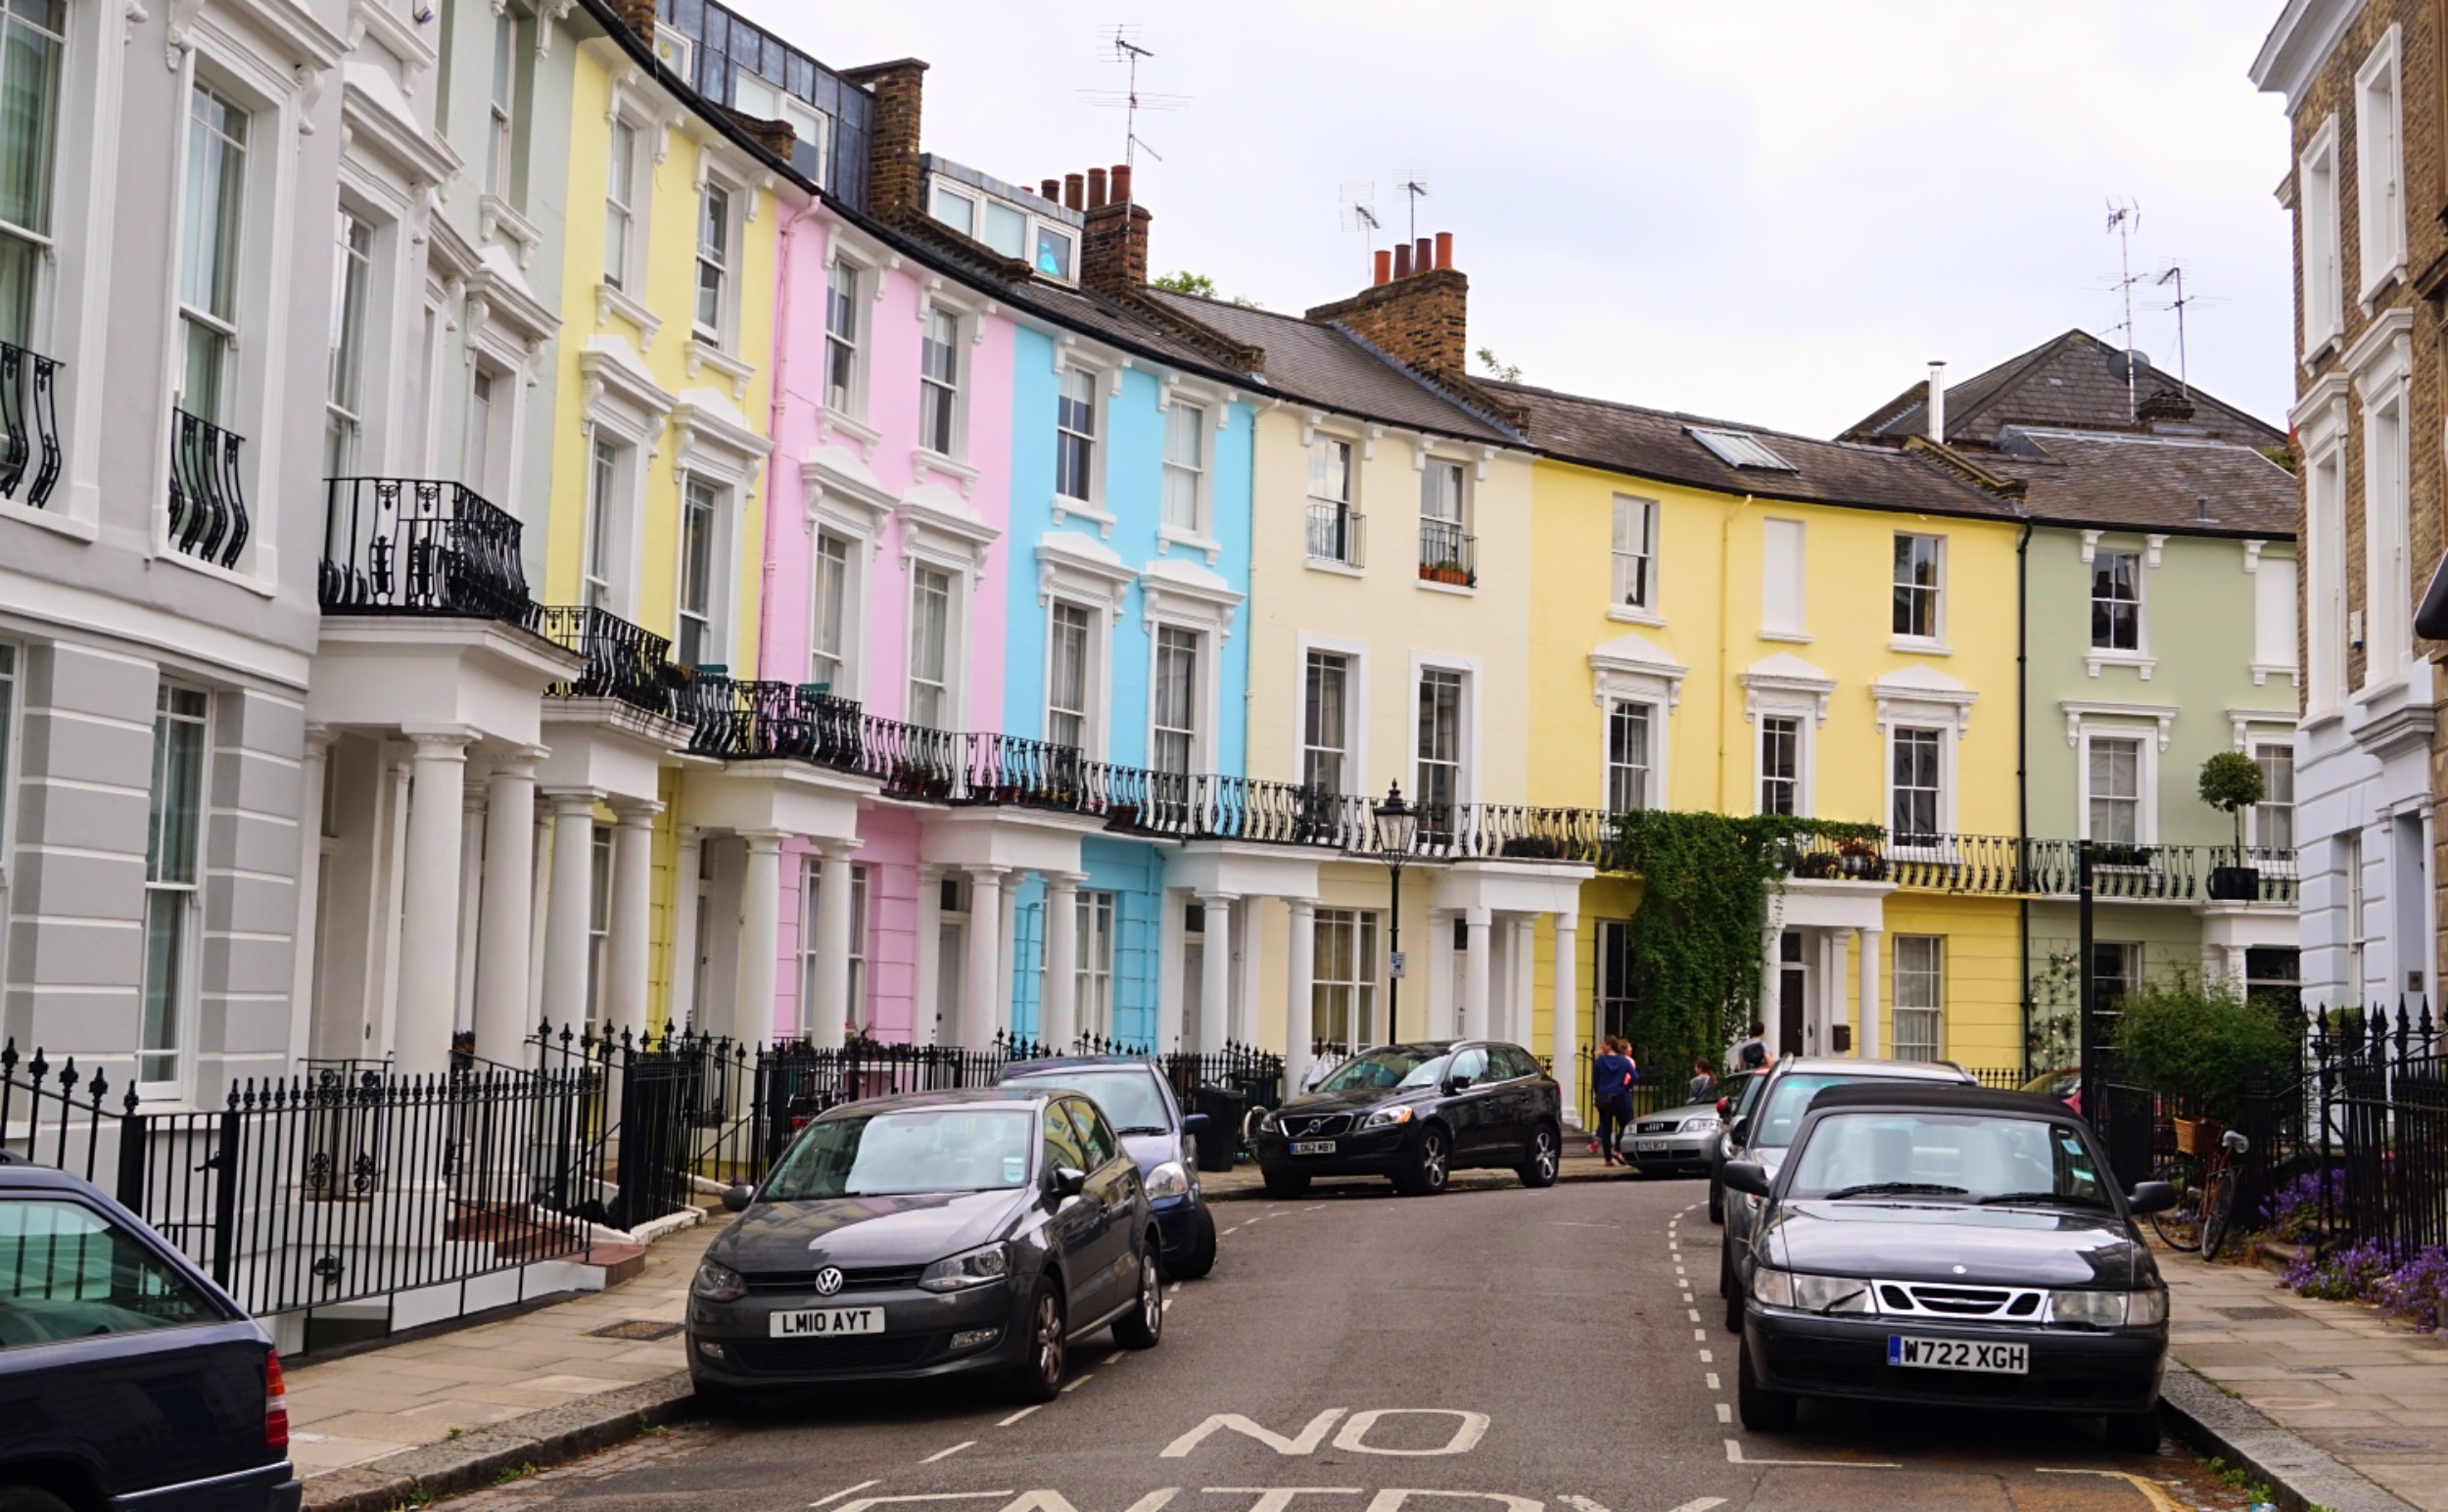 The most colourful streets in London